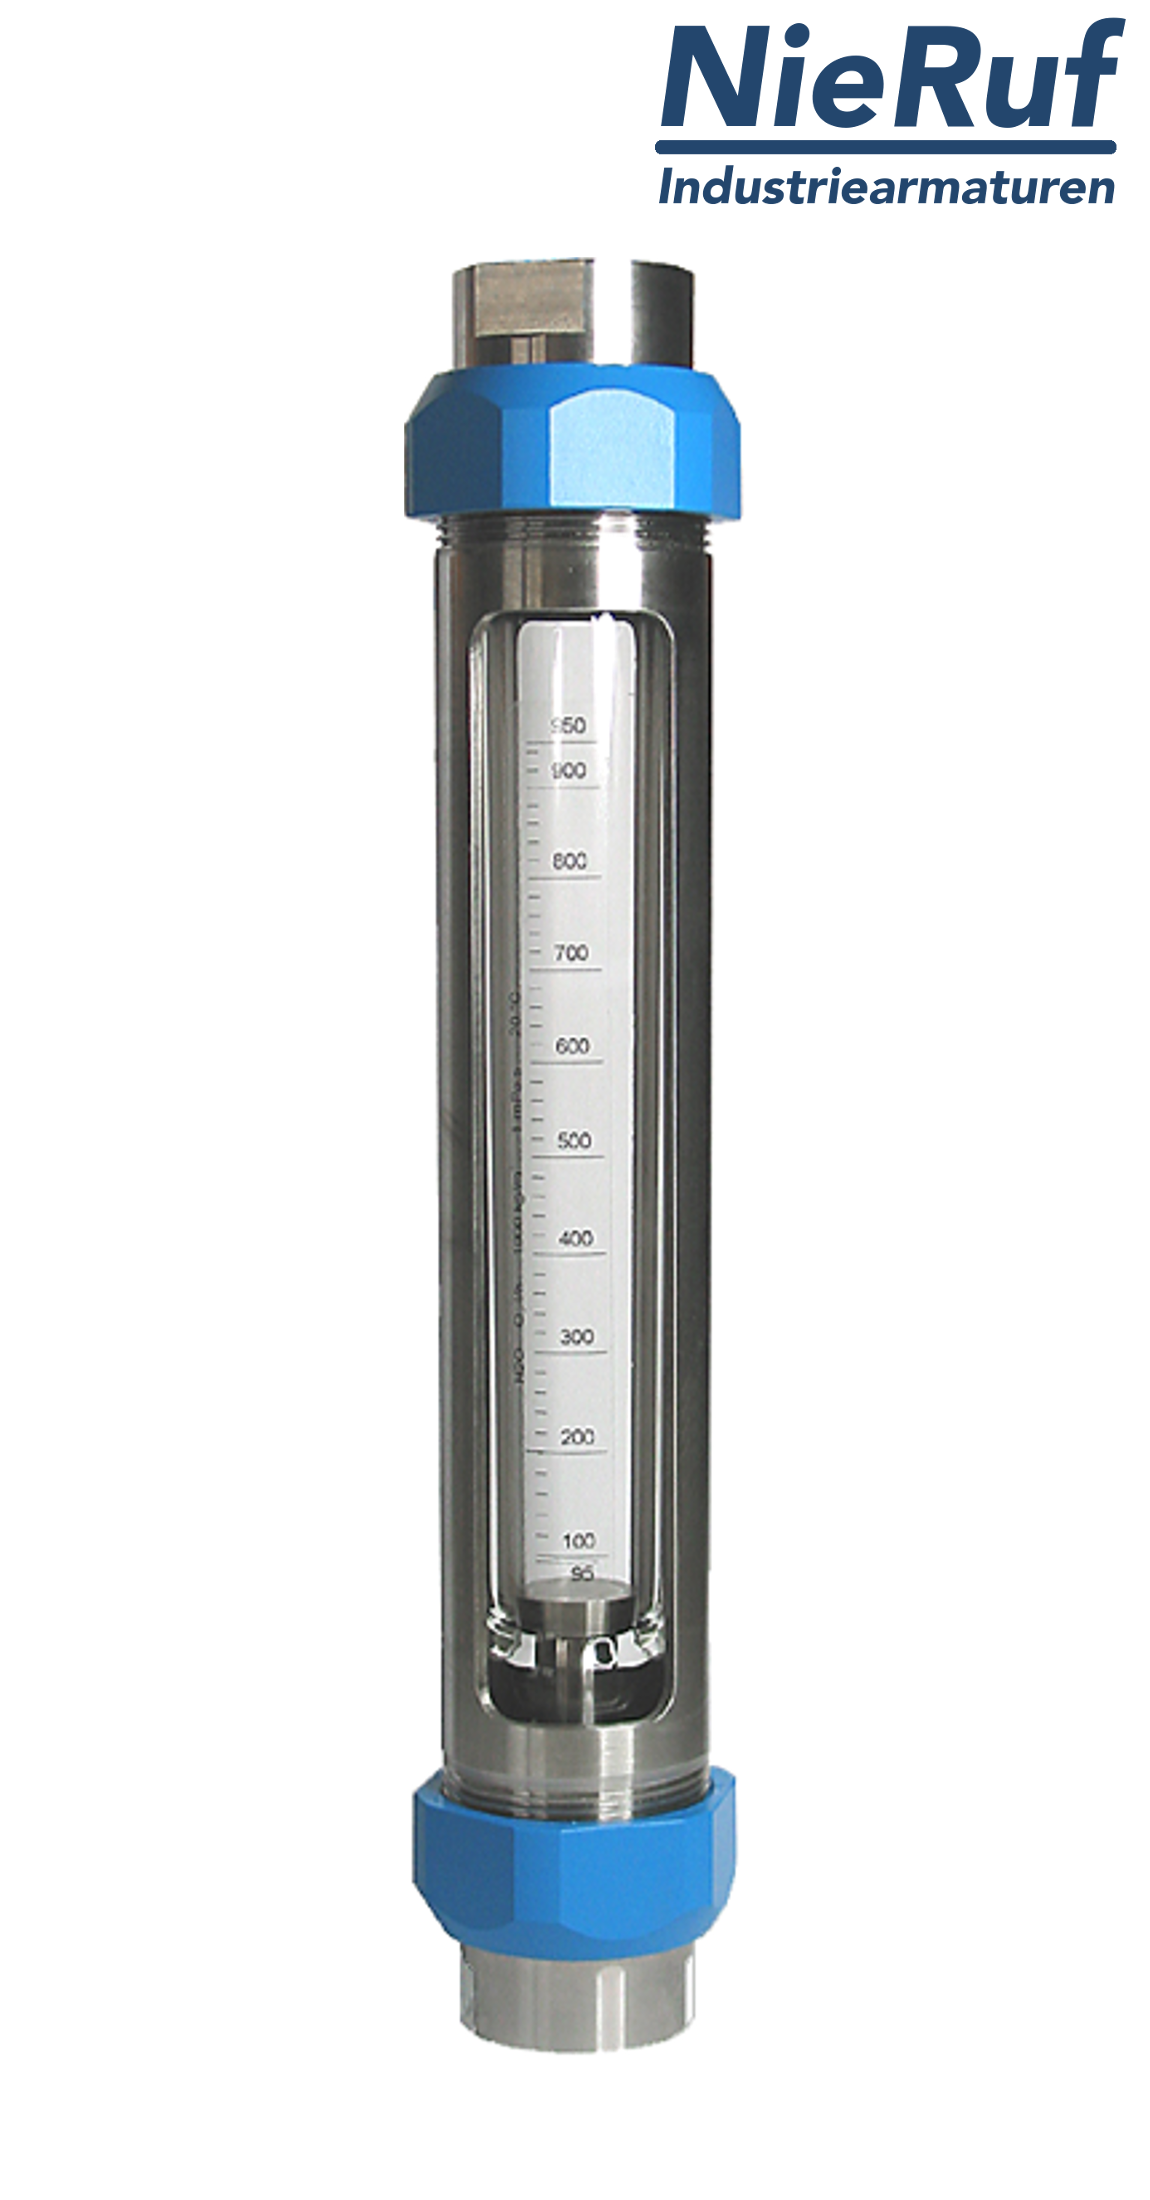 Variable area flowmeter stainless steel + borosilicate 3/4" inch 300.0 - 3000 l/h water FKM